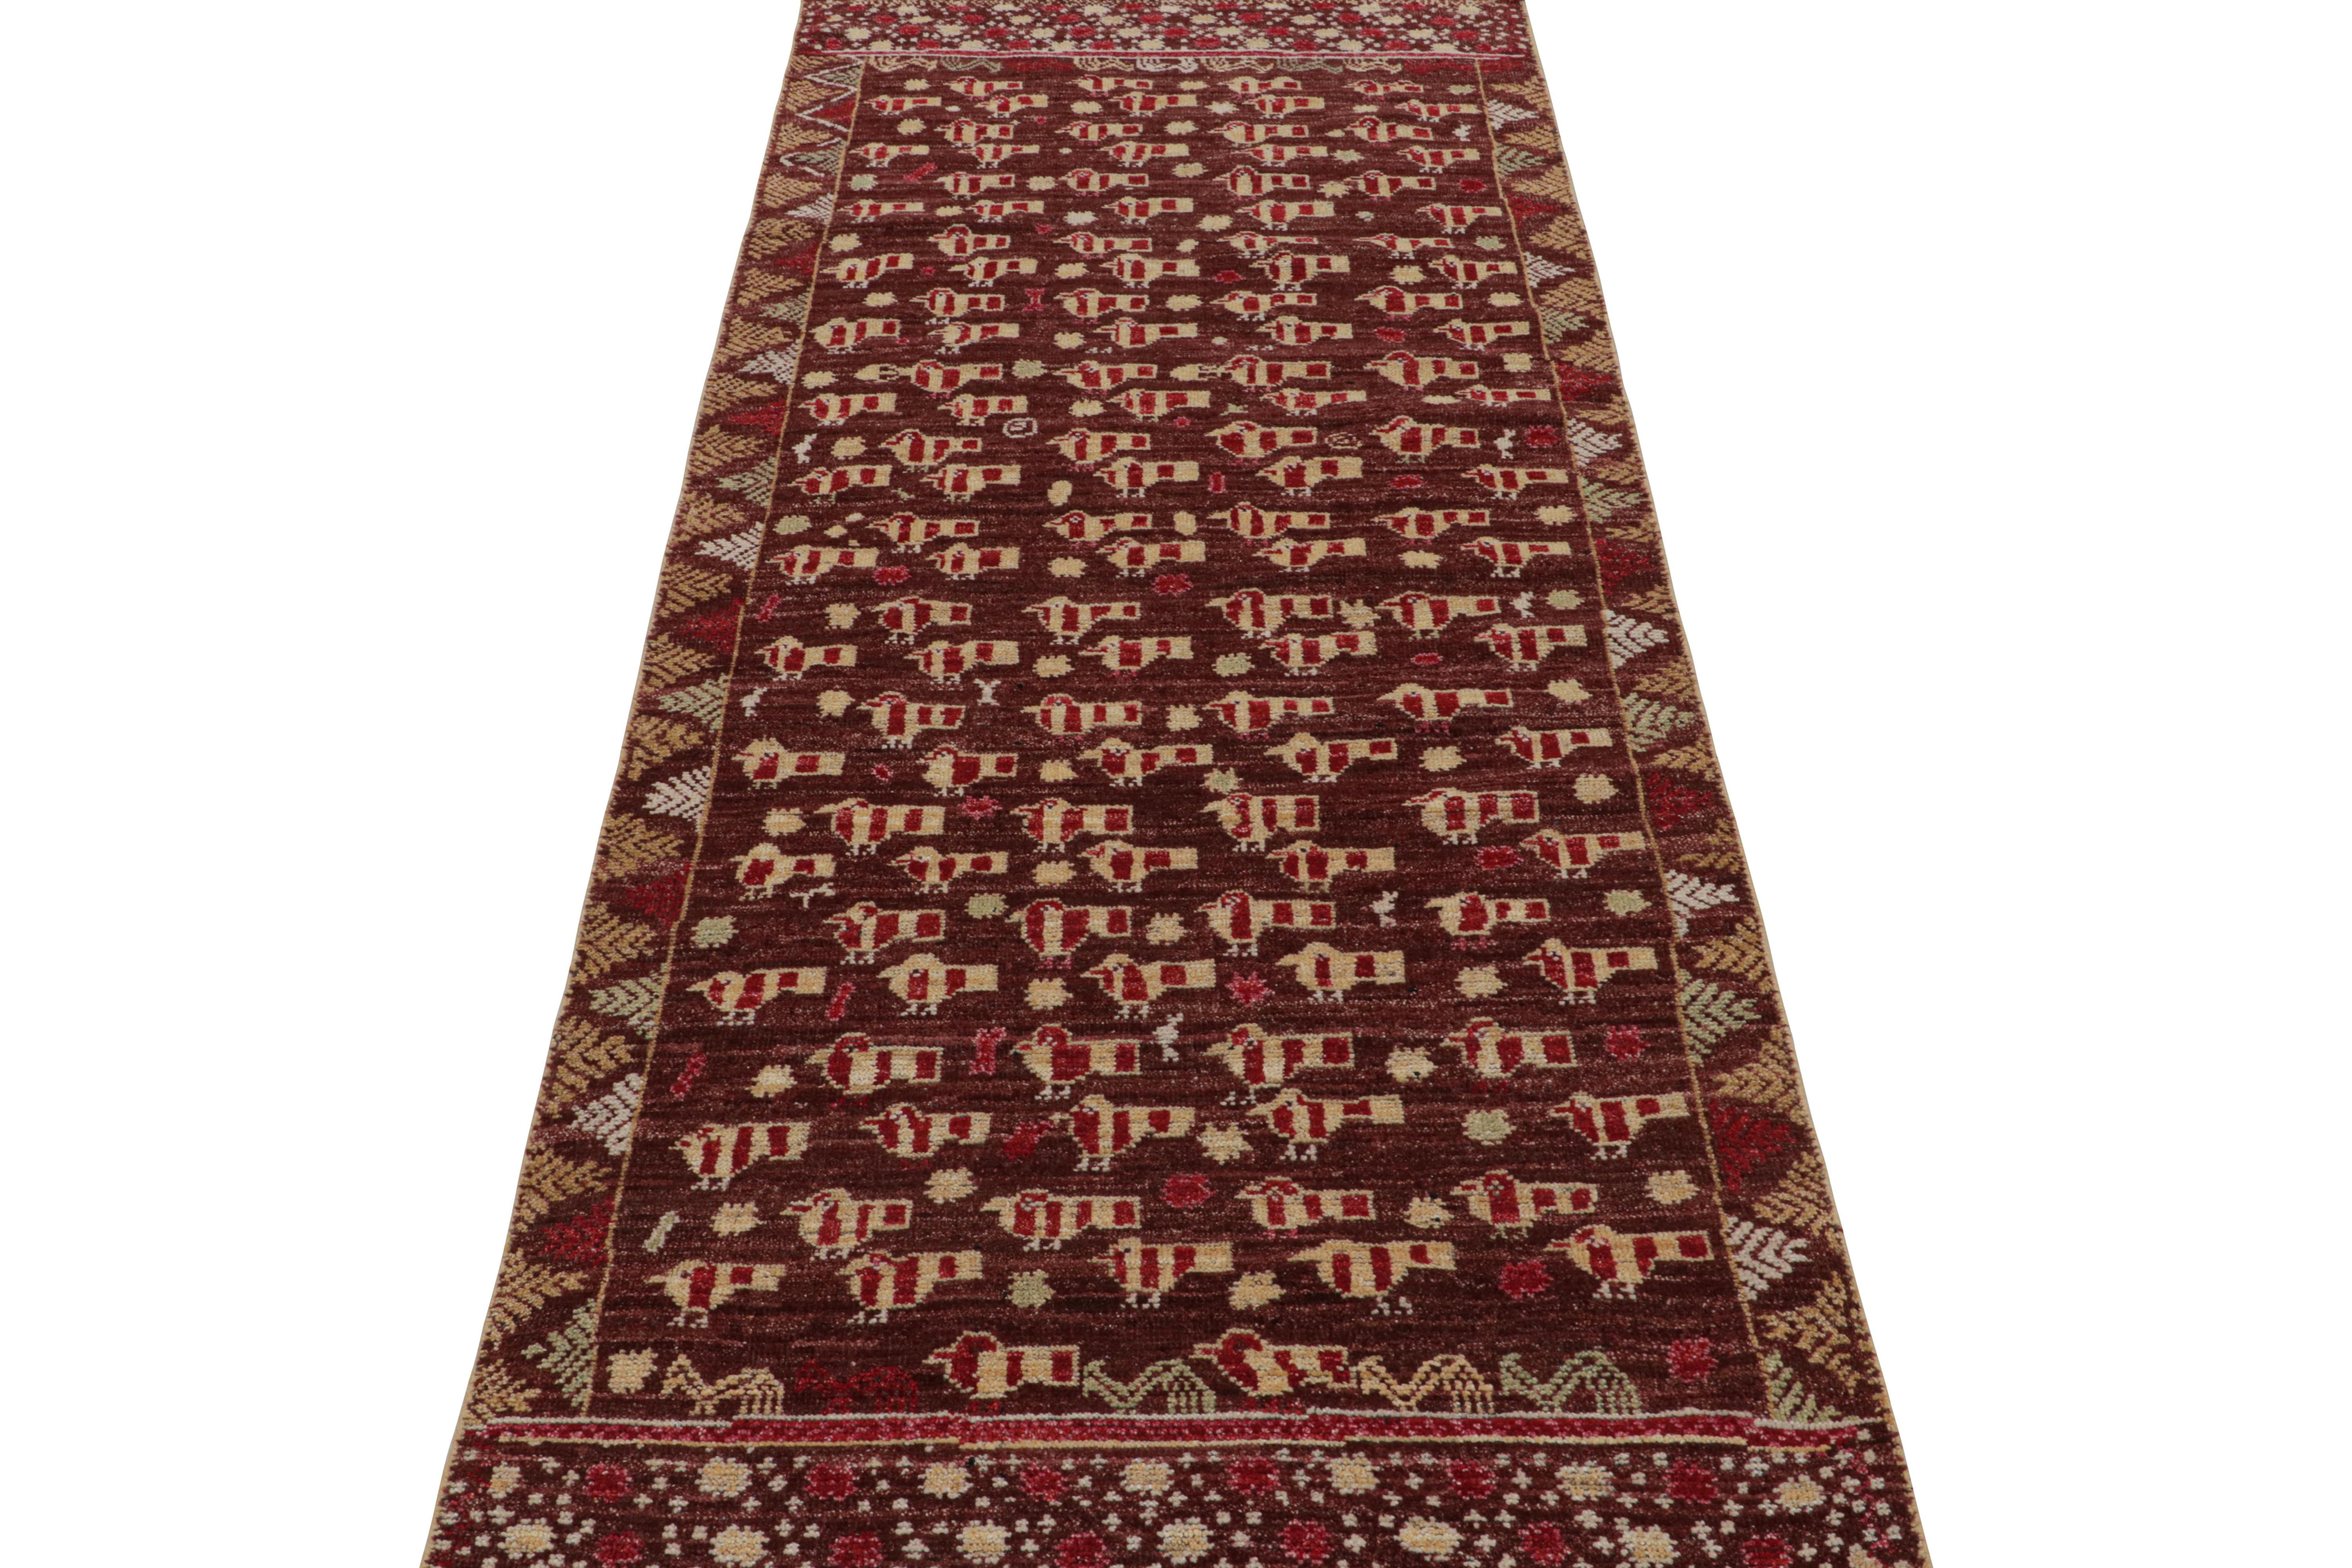 Indian Rug & Kilim’s Tribal Style Runner Rug in Red and Gold Geometric Patterns For Sale